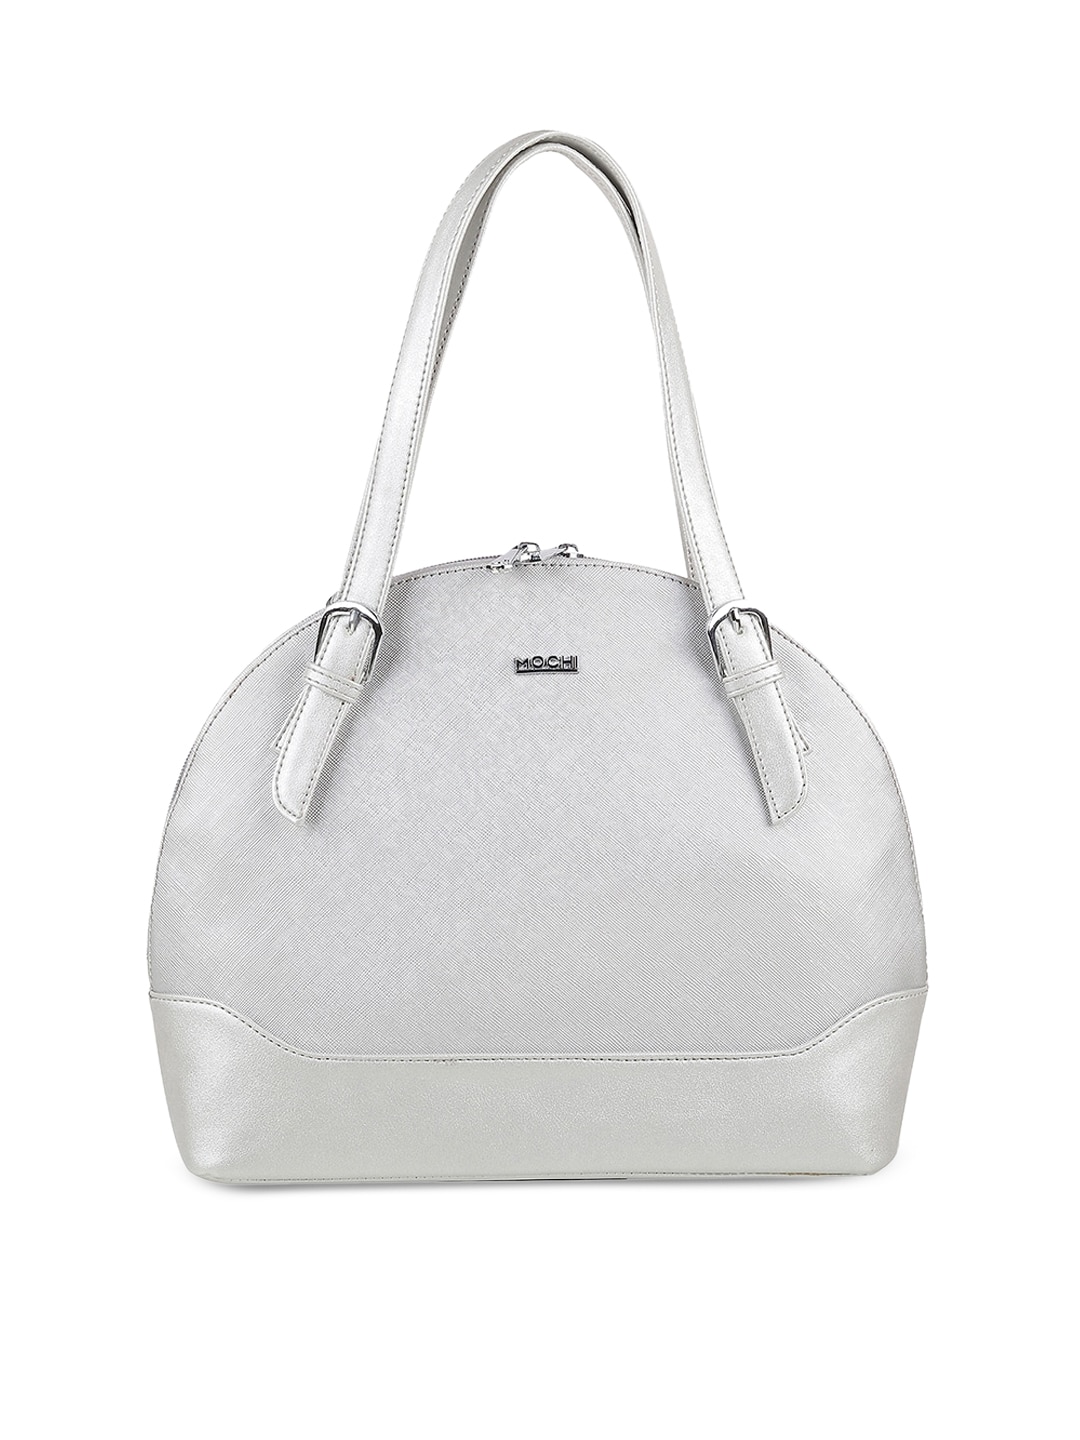 Mochi Silver-Toned PU Structured Handheld Bag Price in India